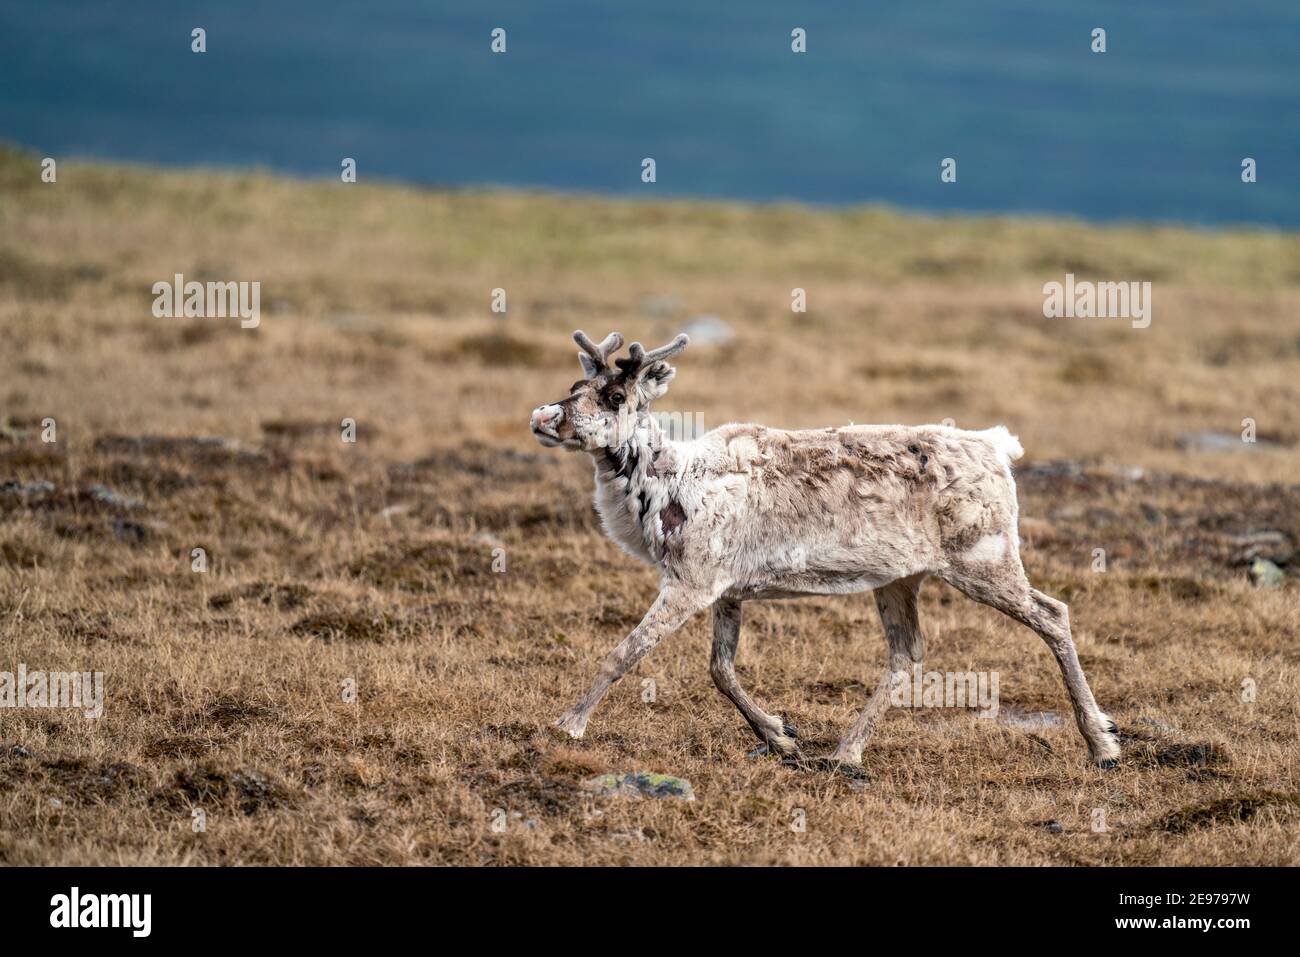 Majestic reindeer in Mountains running With smal antlers Stock Photo